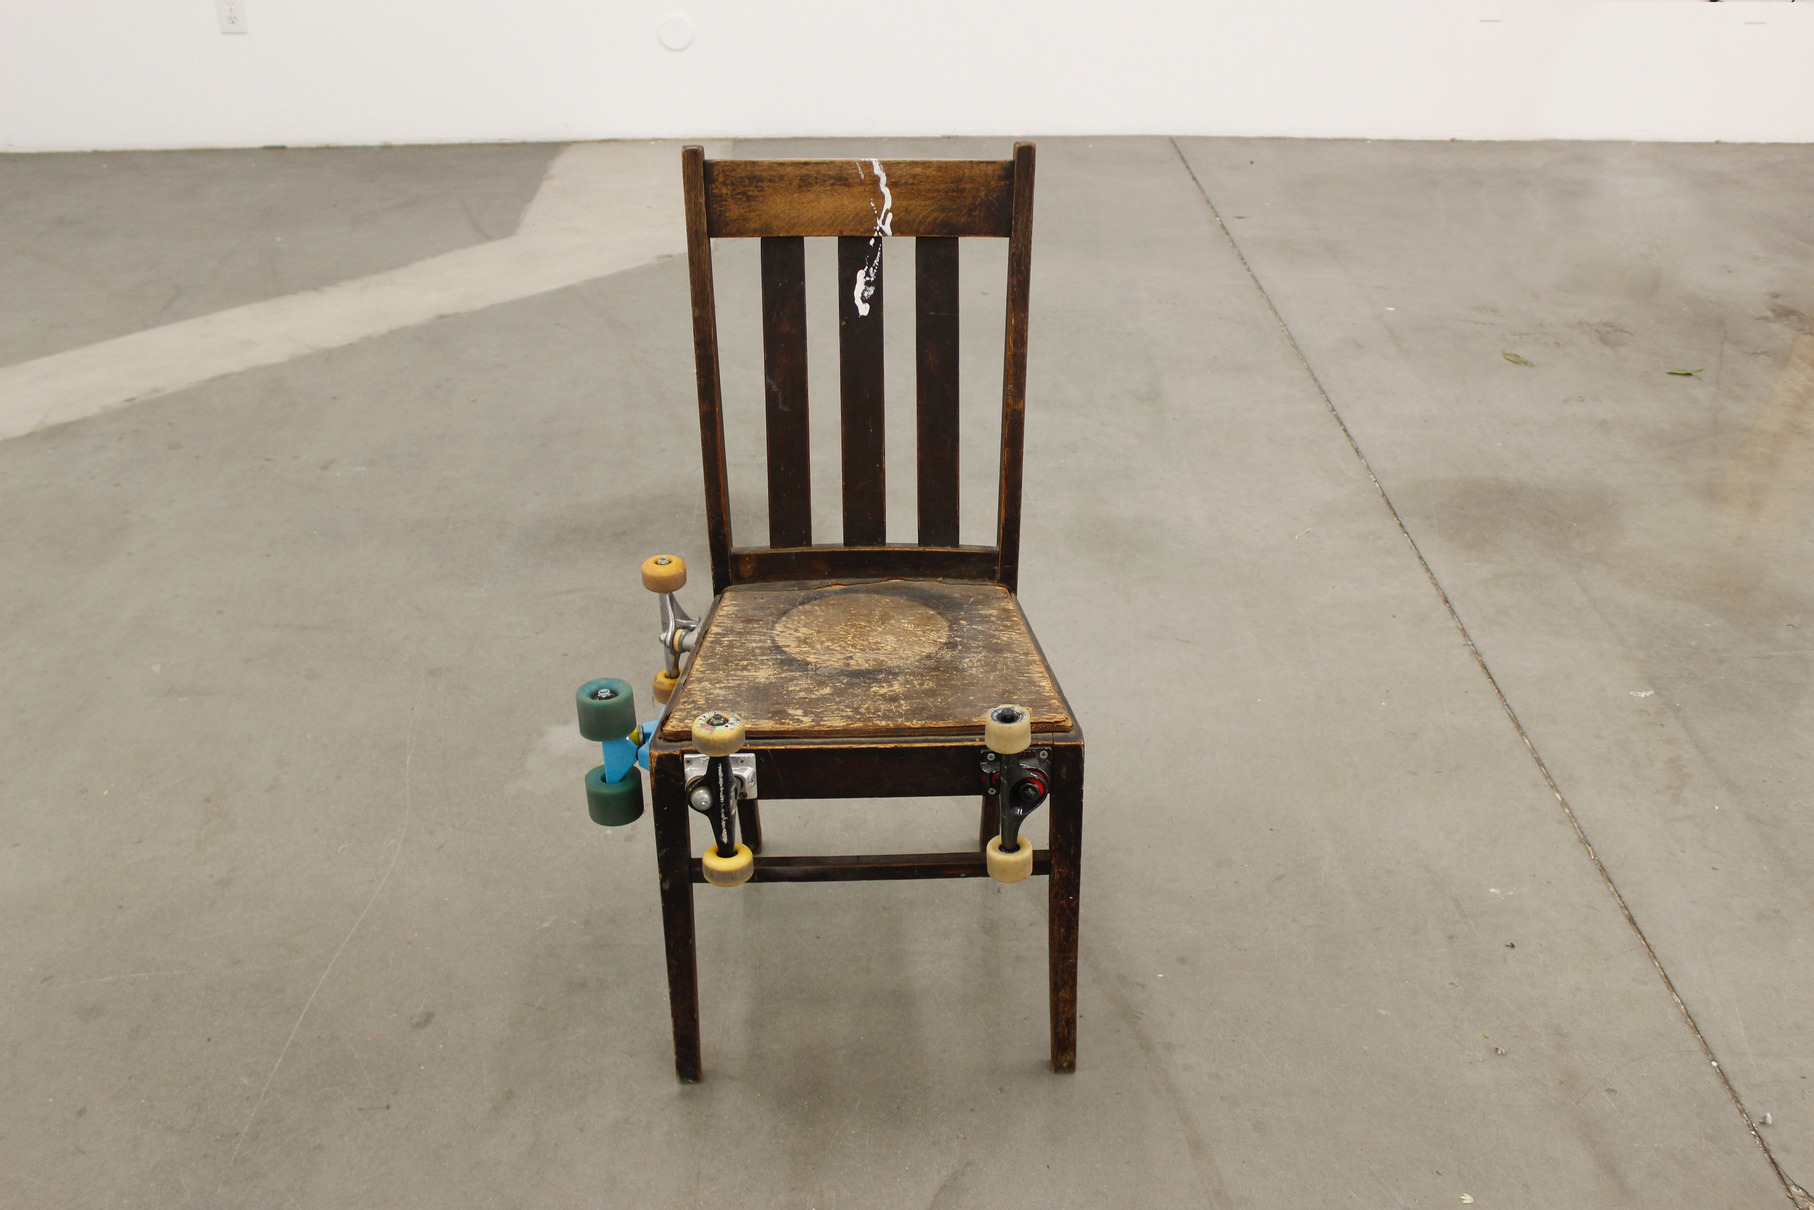 Wheelie Chair - A Sculpture by Brian Dario, An old wooden chair with four skateboard trucks, wheels still attatched, fastened to the front side, and the sitter's right-hand side.  There are no trucks fastened to the sitter's left-hand side